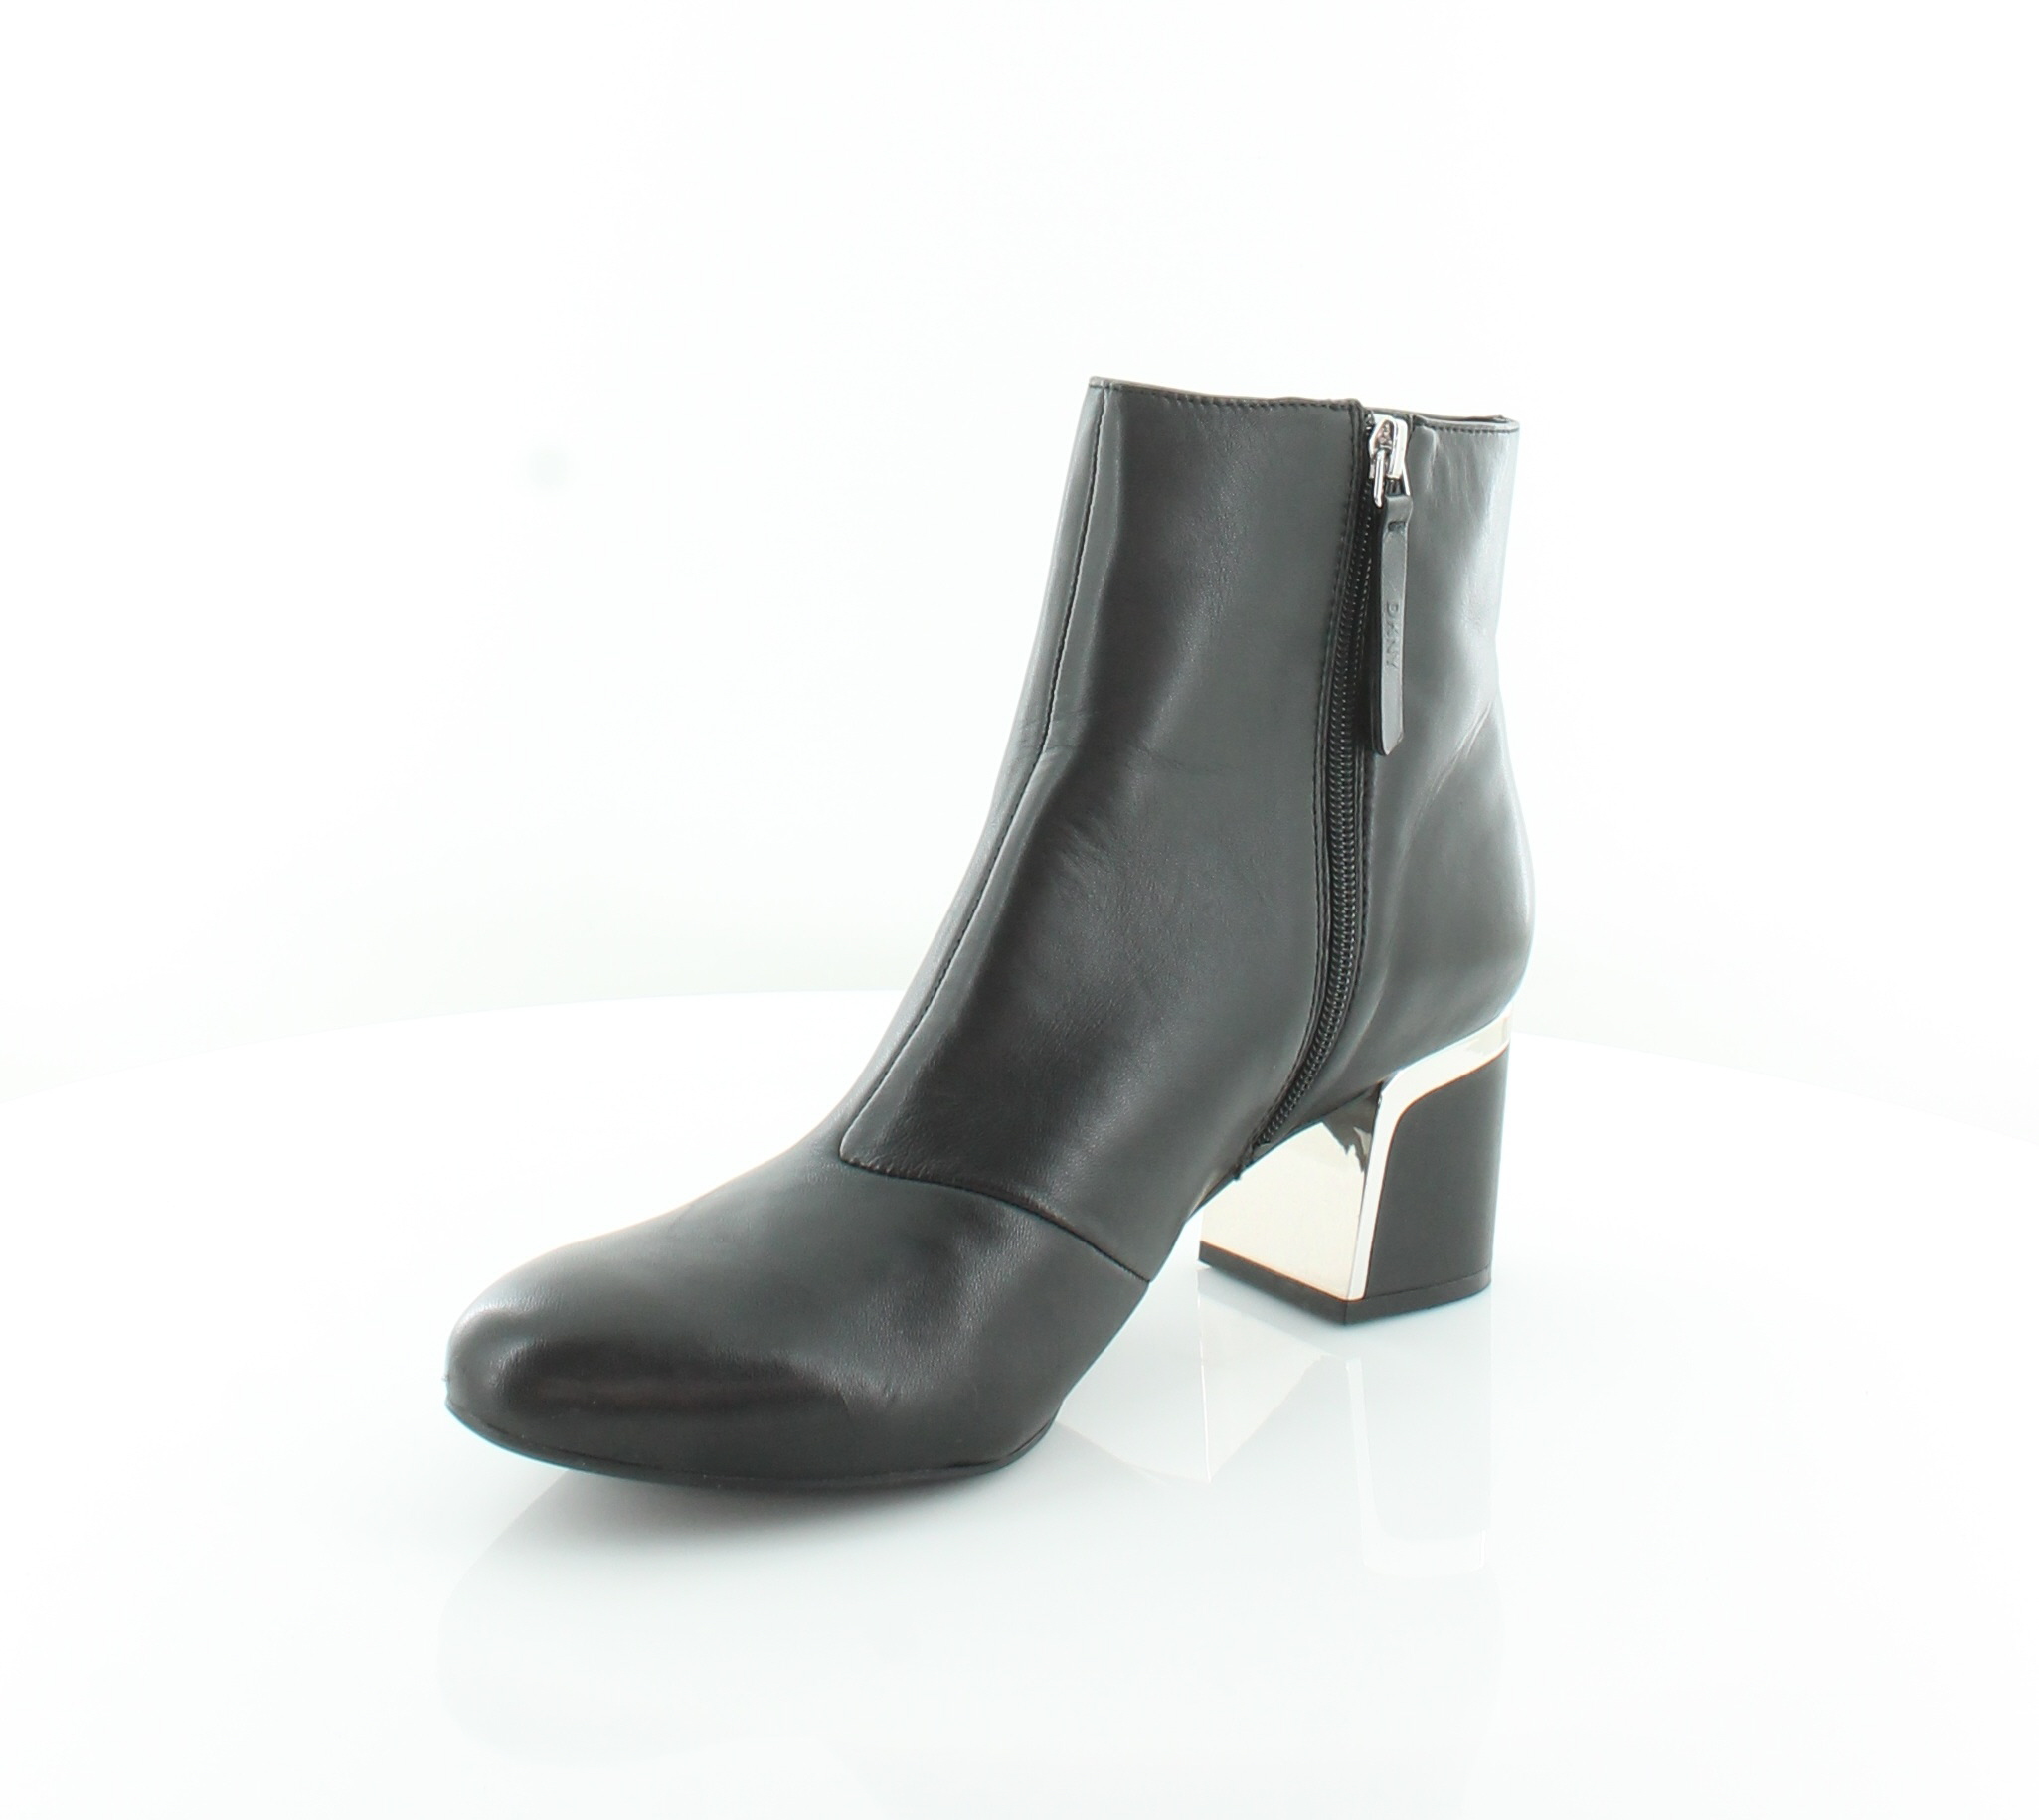 DKNY Womens Corrie Leather Almond Toe Ankle Fashion Boots, Black, Size ...